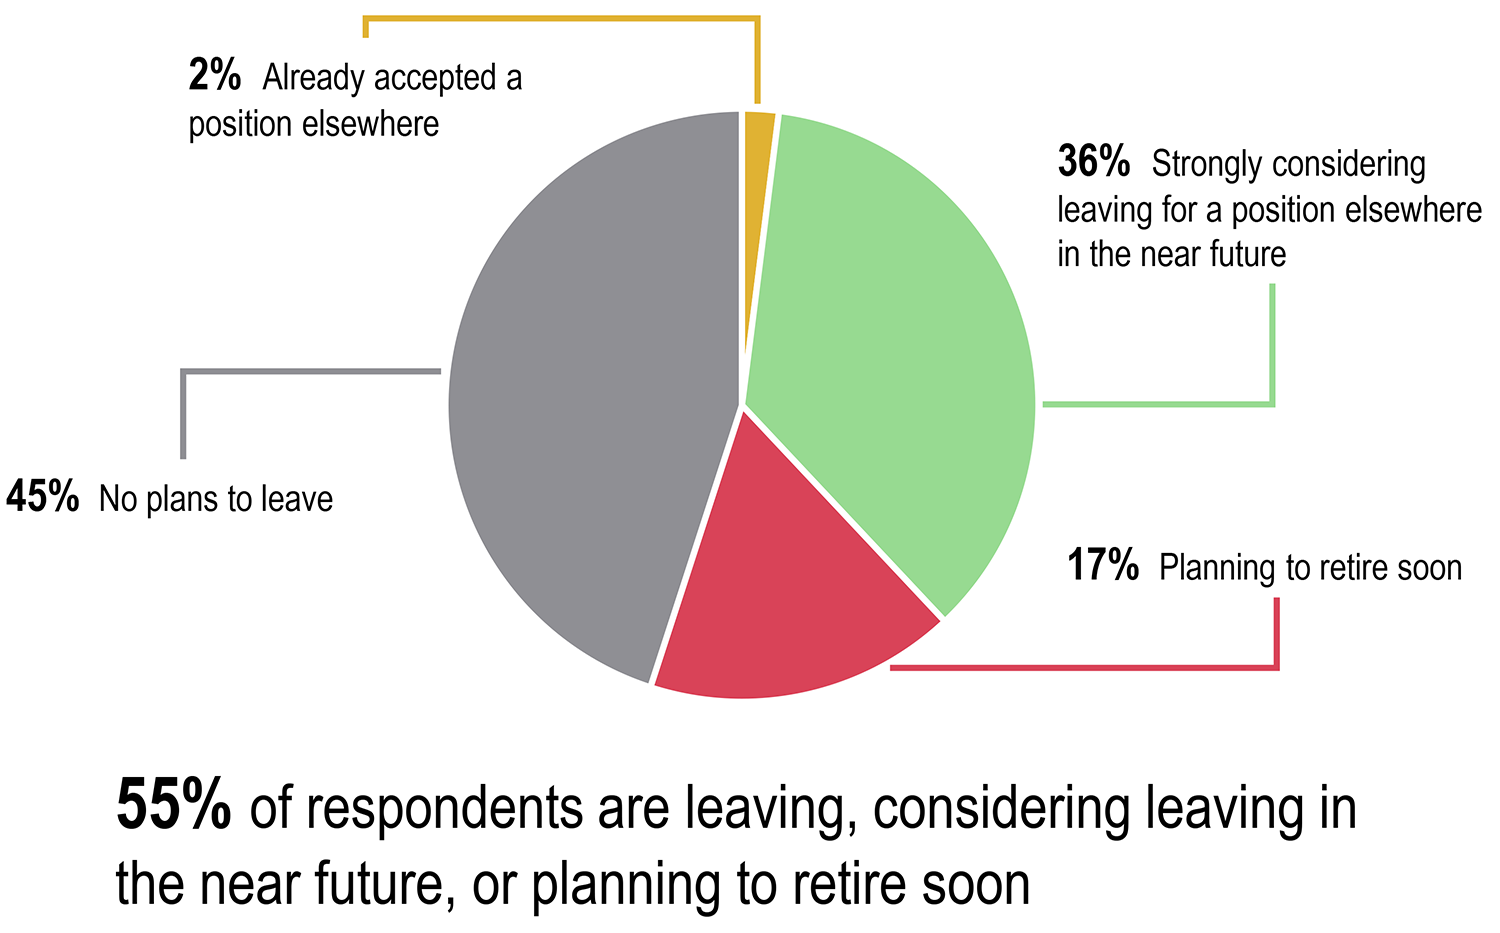 55% of respondents are leaving, considering leaving in the near future, or planning to retire soon. Pie chart: 45%  No plans to leave; 36%  Strongly considering leaving for a position elsewhere in the near future; 17%  Planning to retire soon; 2%  Already accepted a position elsewhere.